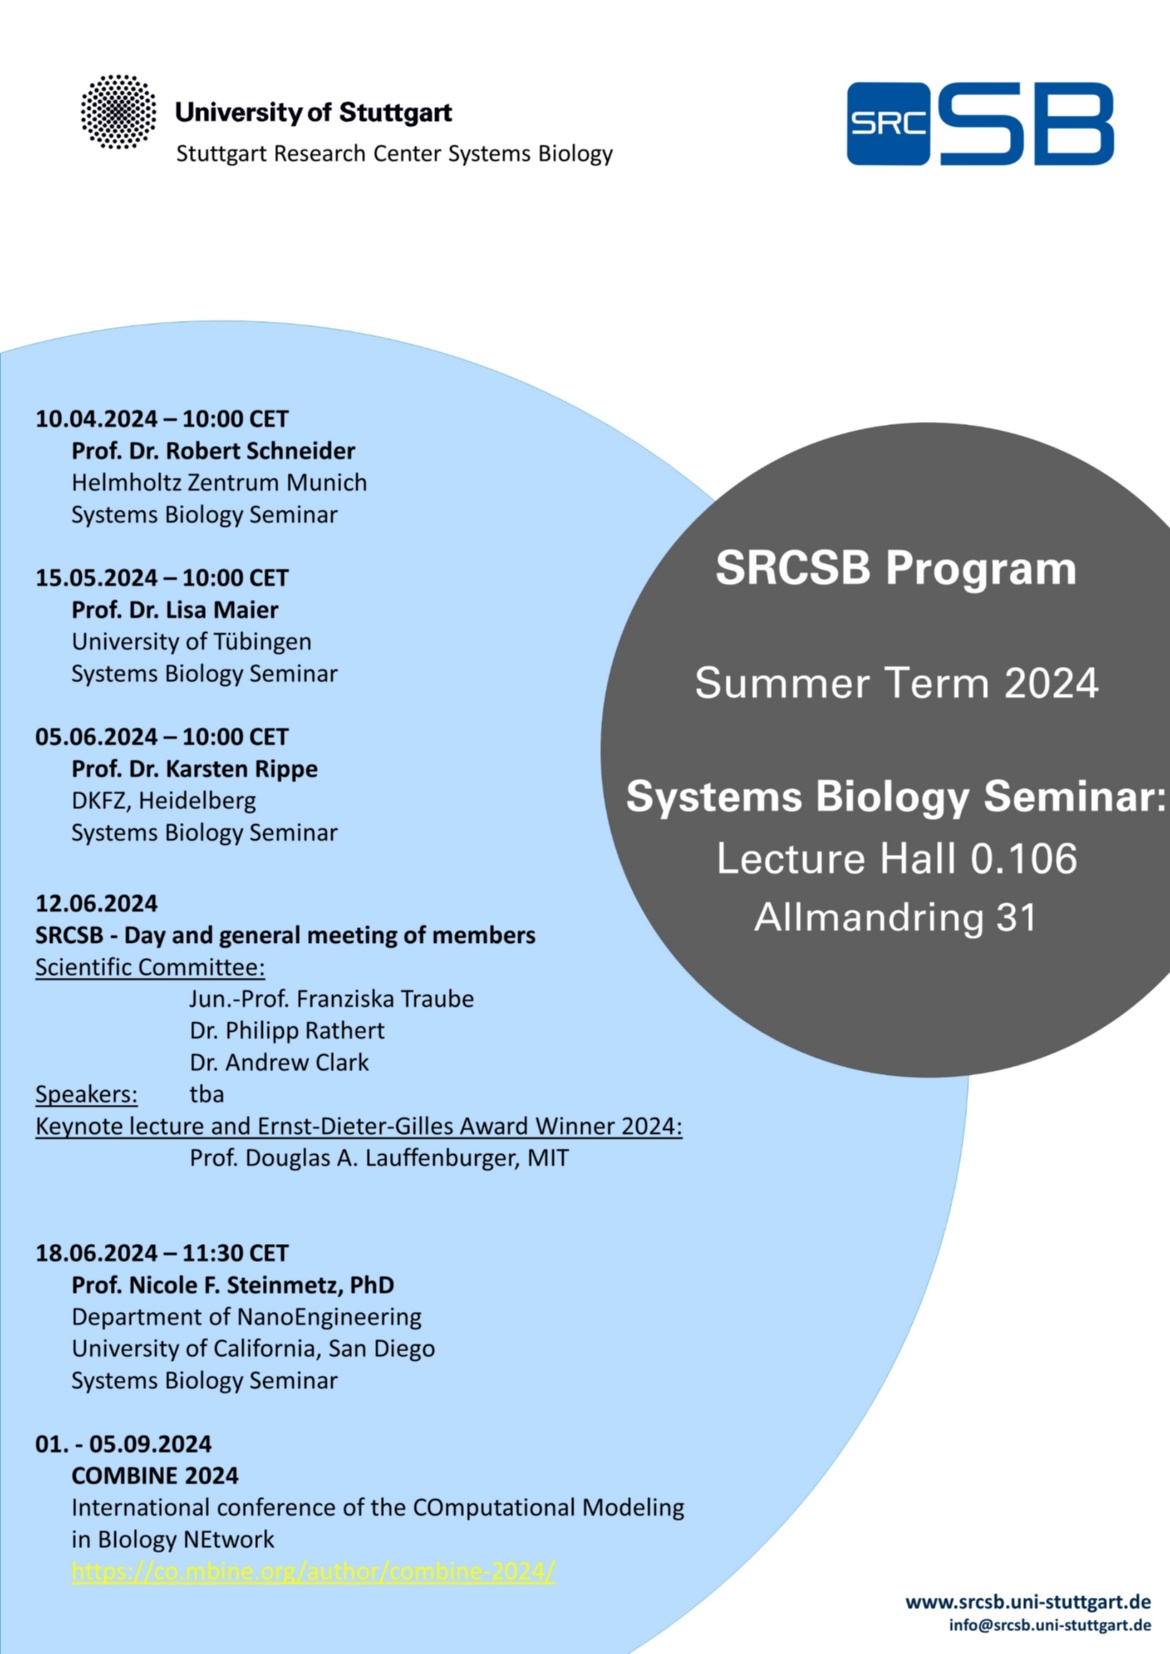 Programme for the Systems Biology Seminar 2024